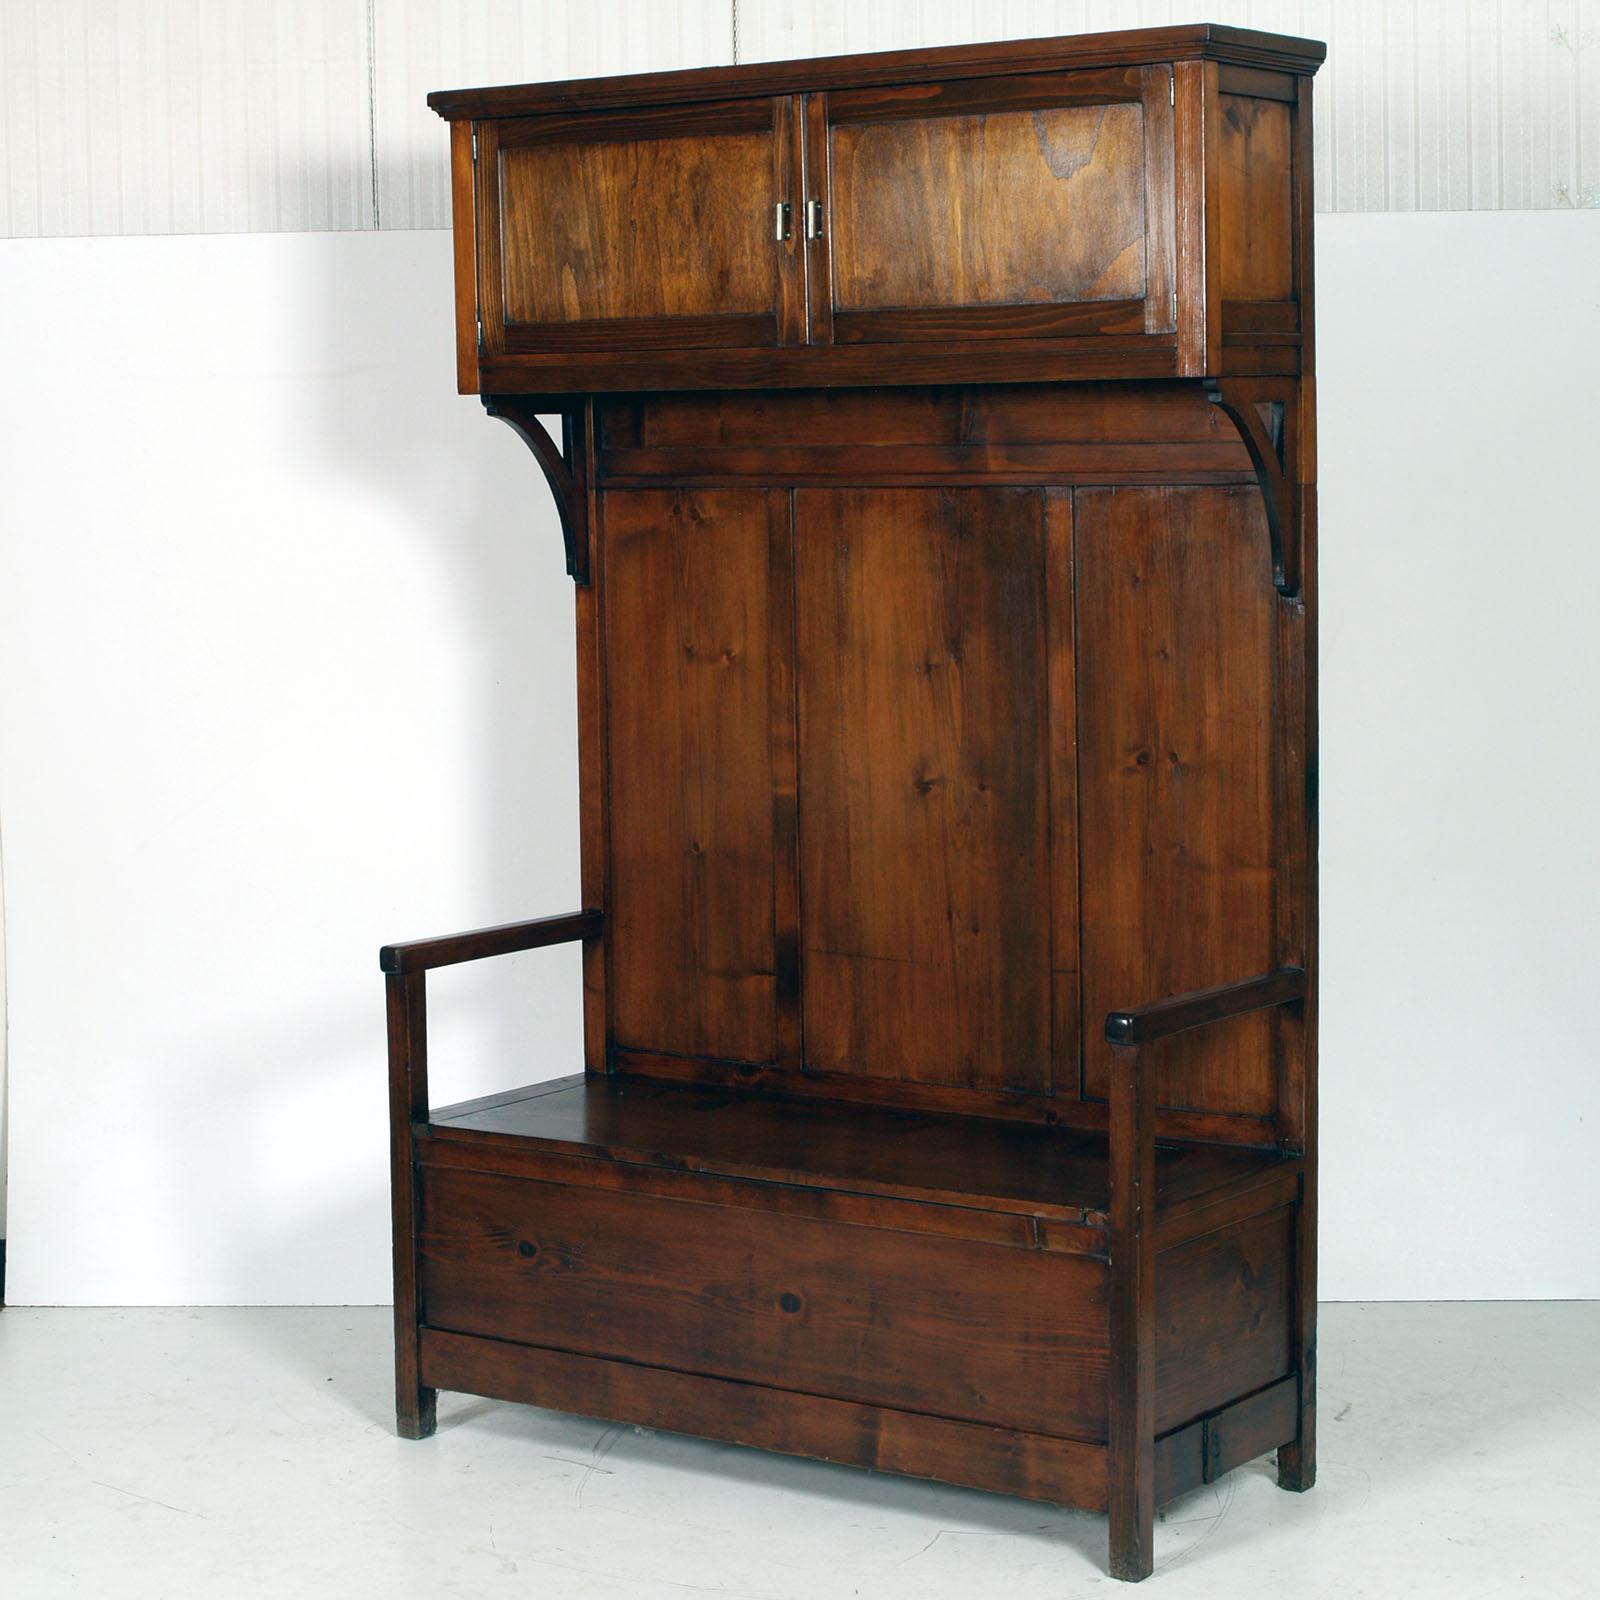 Early 20th century, Art Nouveau period, chest or bench entrance furniture, in solid fir, restored and polished to wax

Measures cm: H 50\201, W 120, D 50.